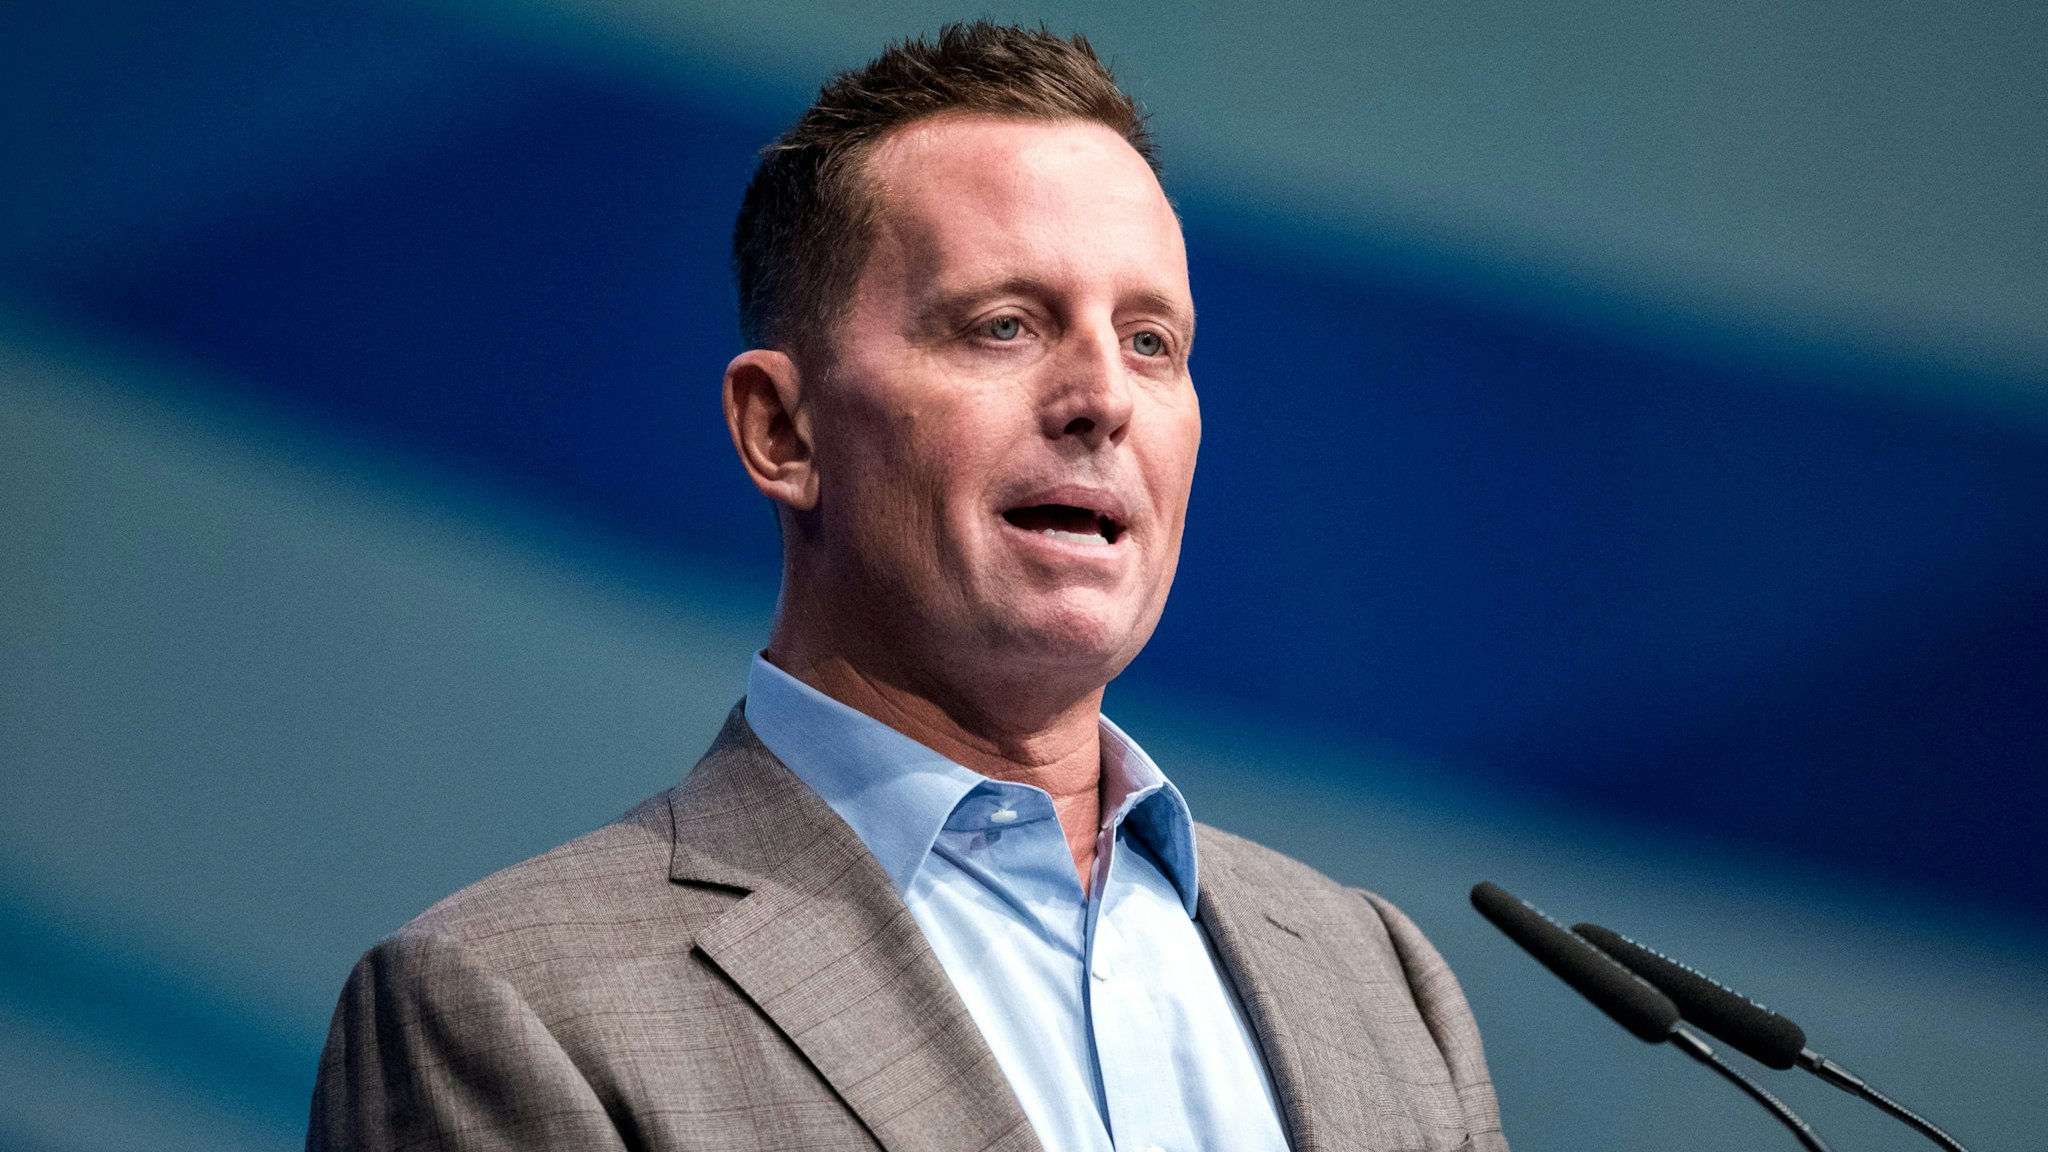 Richard Grenell, US ambassador to Germany, gives a speech as he attends a congress of the Junge Union (JU), the youth wing of Germany's conservative CDU/CSU union, on October 5, 2018 in Kiel, northern Germany.